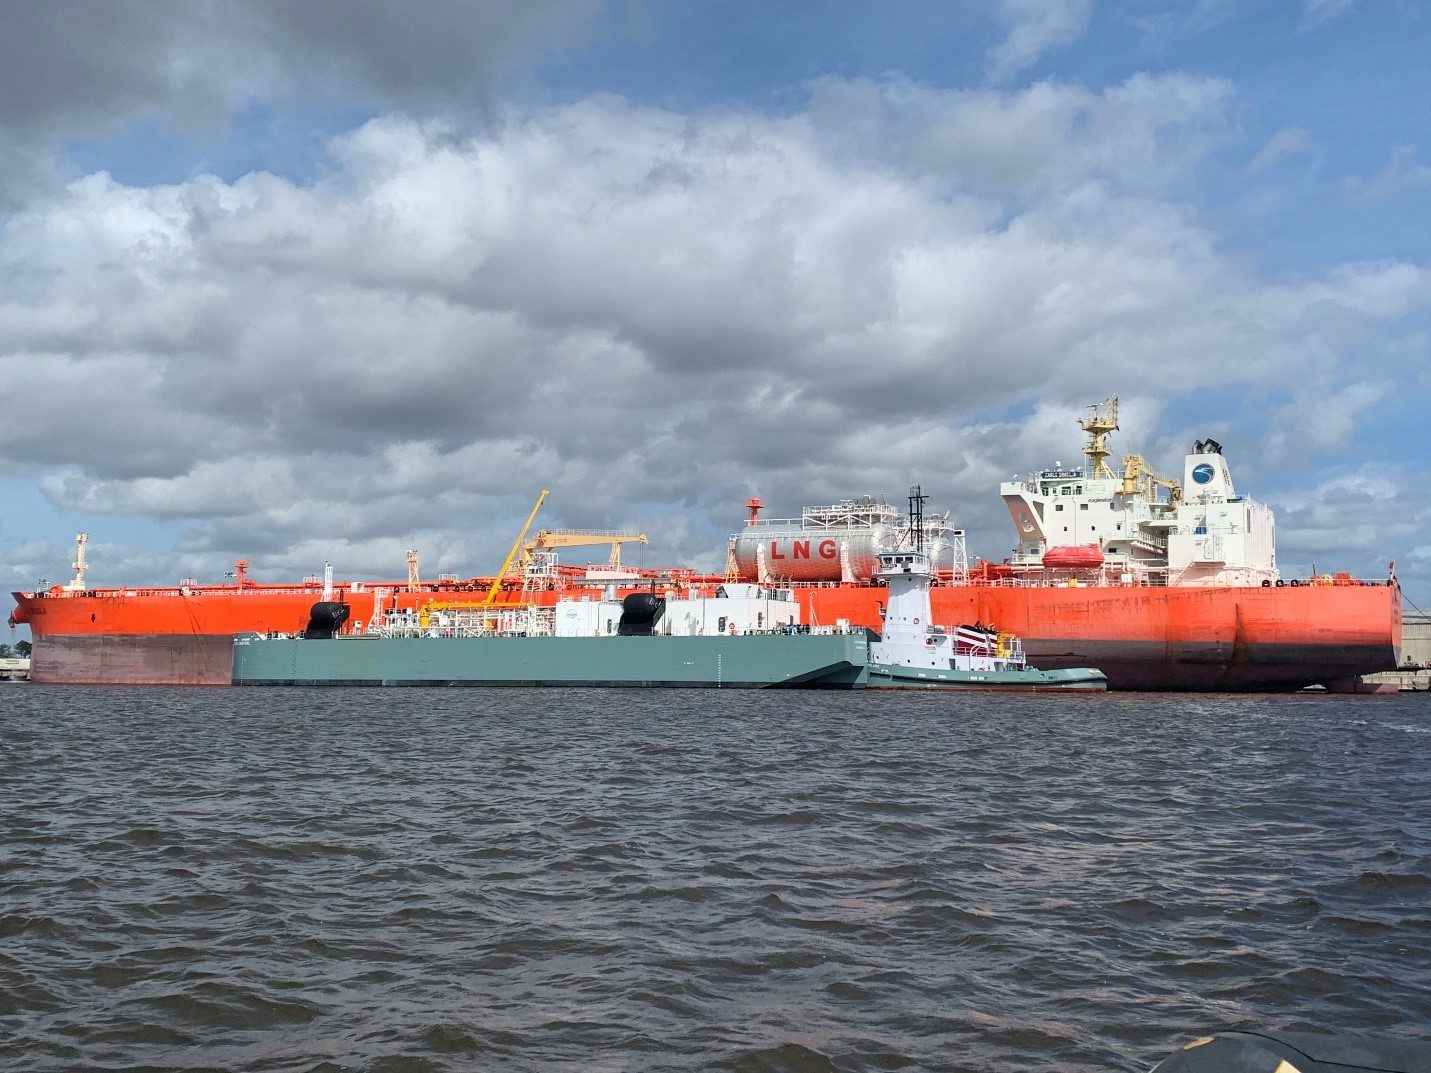 ‘Clean Canaveral’ Performs Inaugural Barge-to-Ship LNG Bunkering Operation